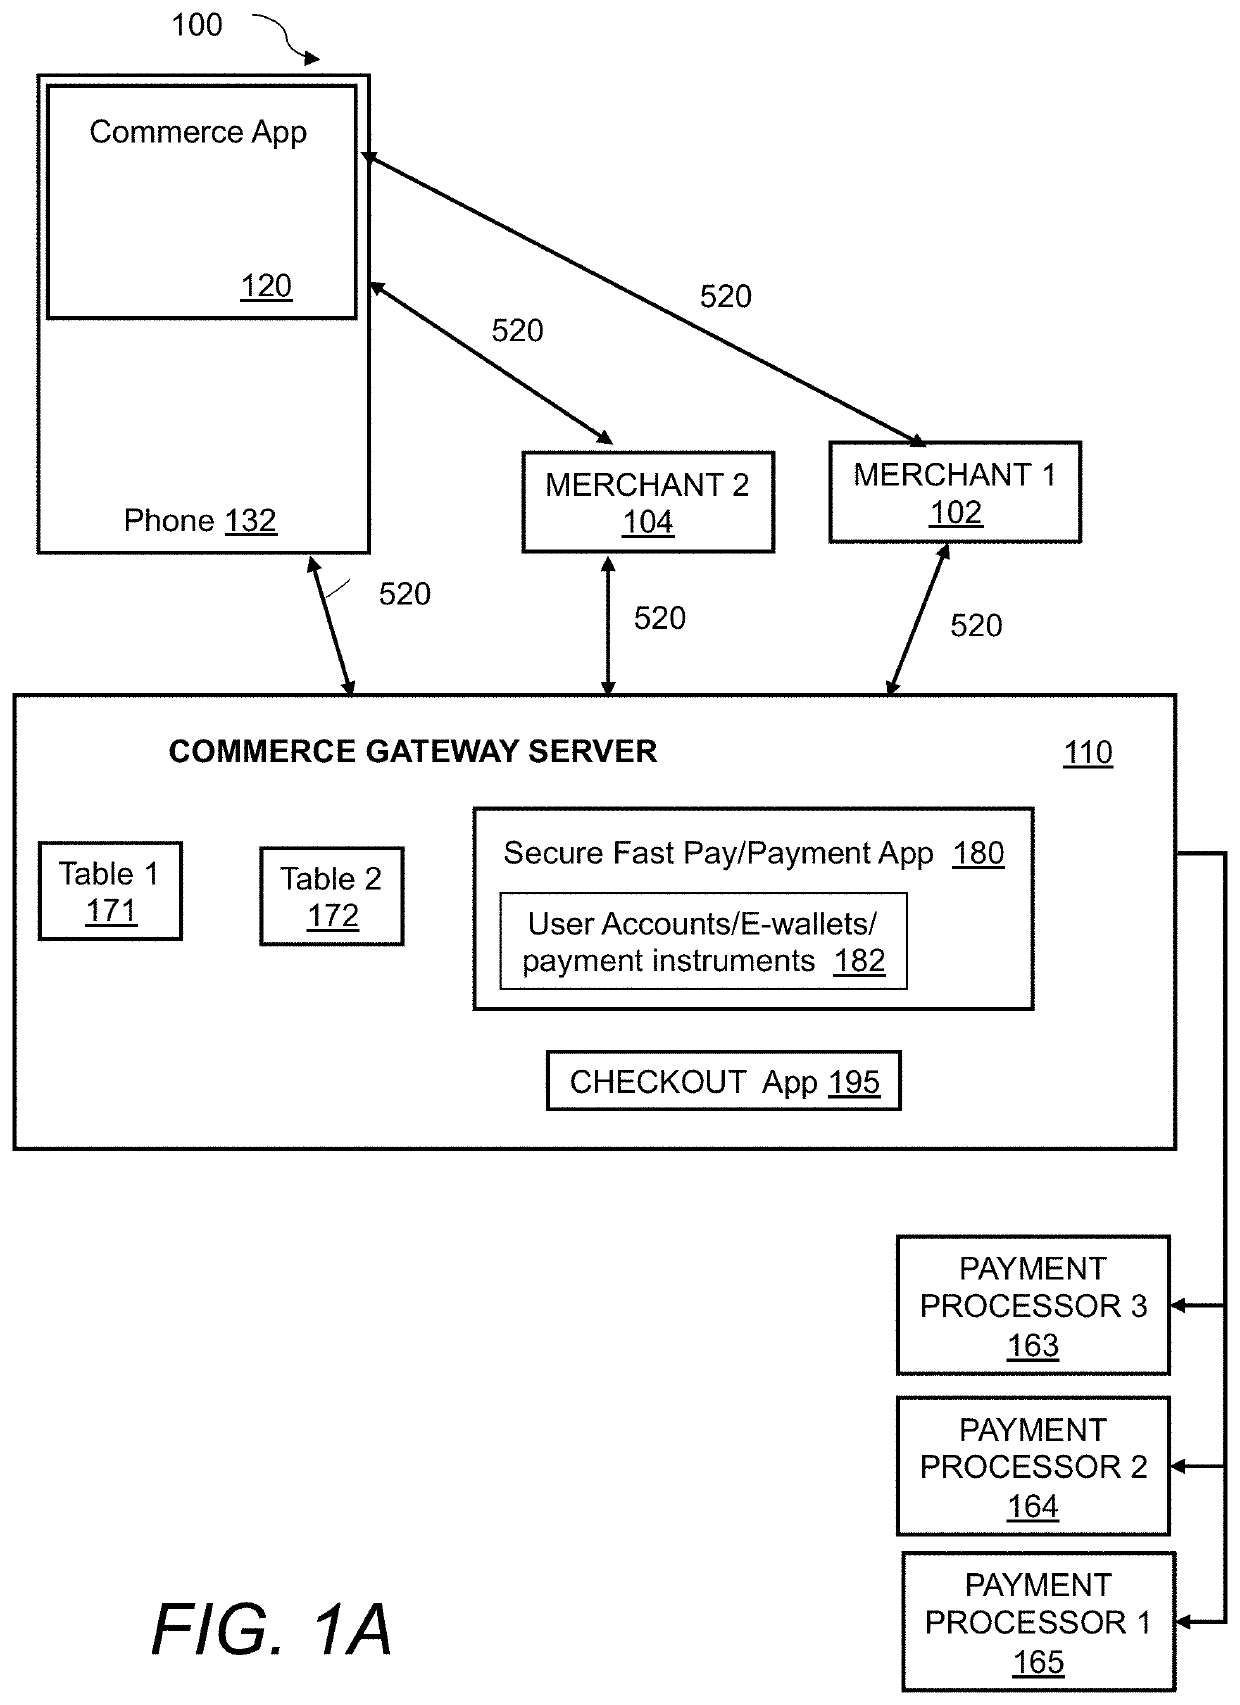 System and method for incorporating one-time tokens, coupons, and reward systems into merchant point of sale checkout systems